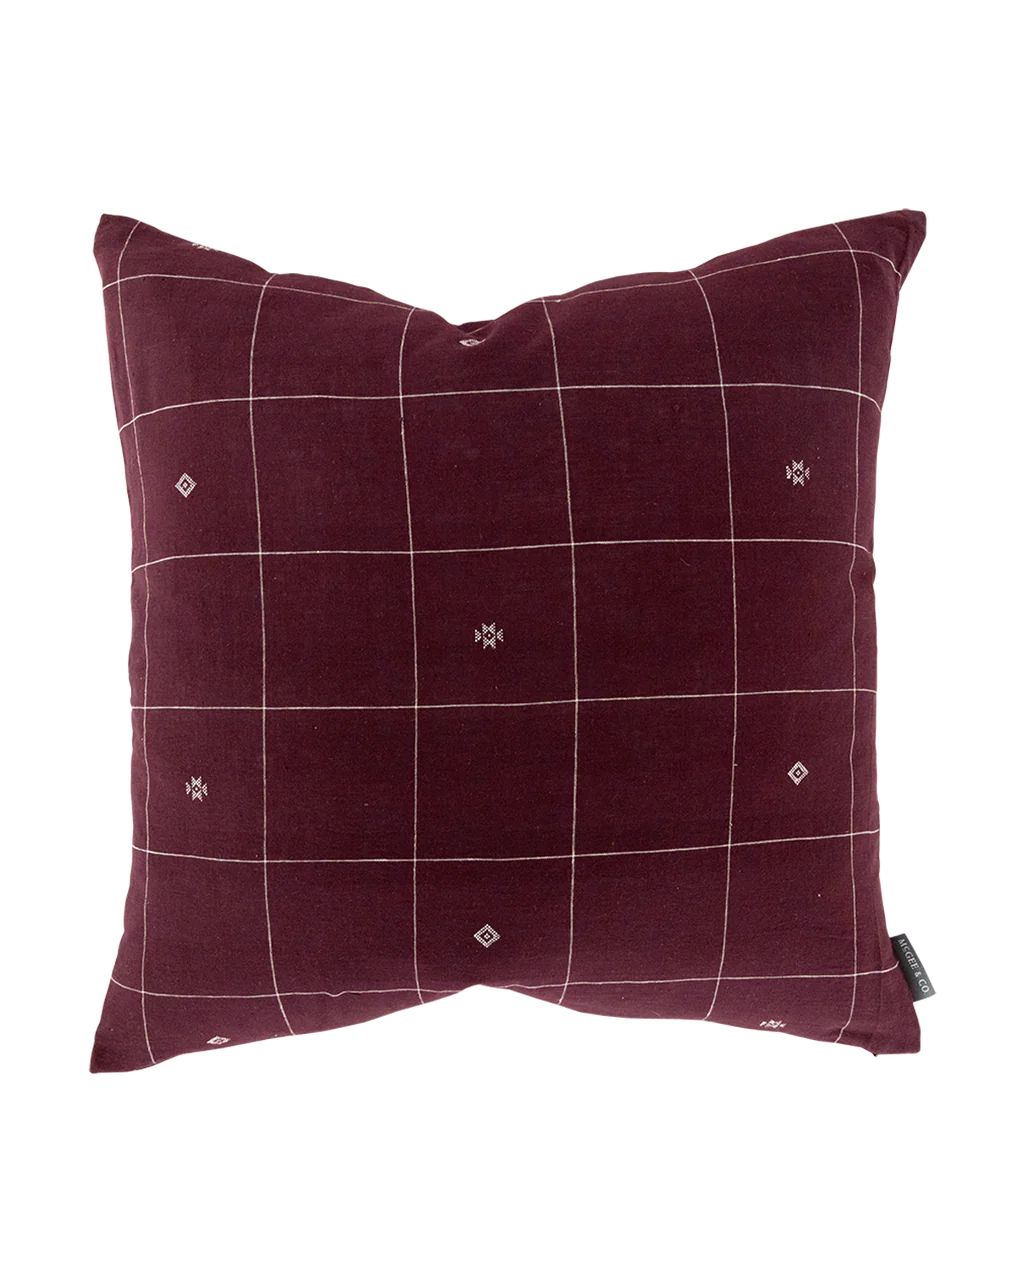 Winifred Pillow Cover | McGee & Co.